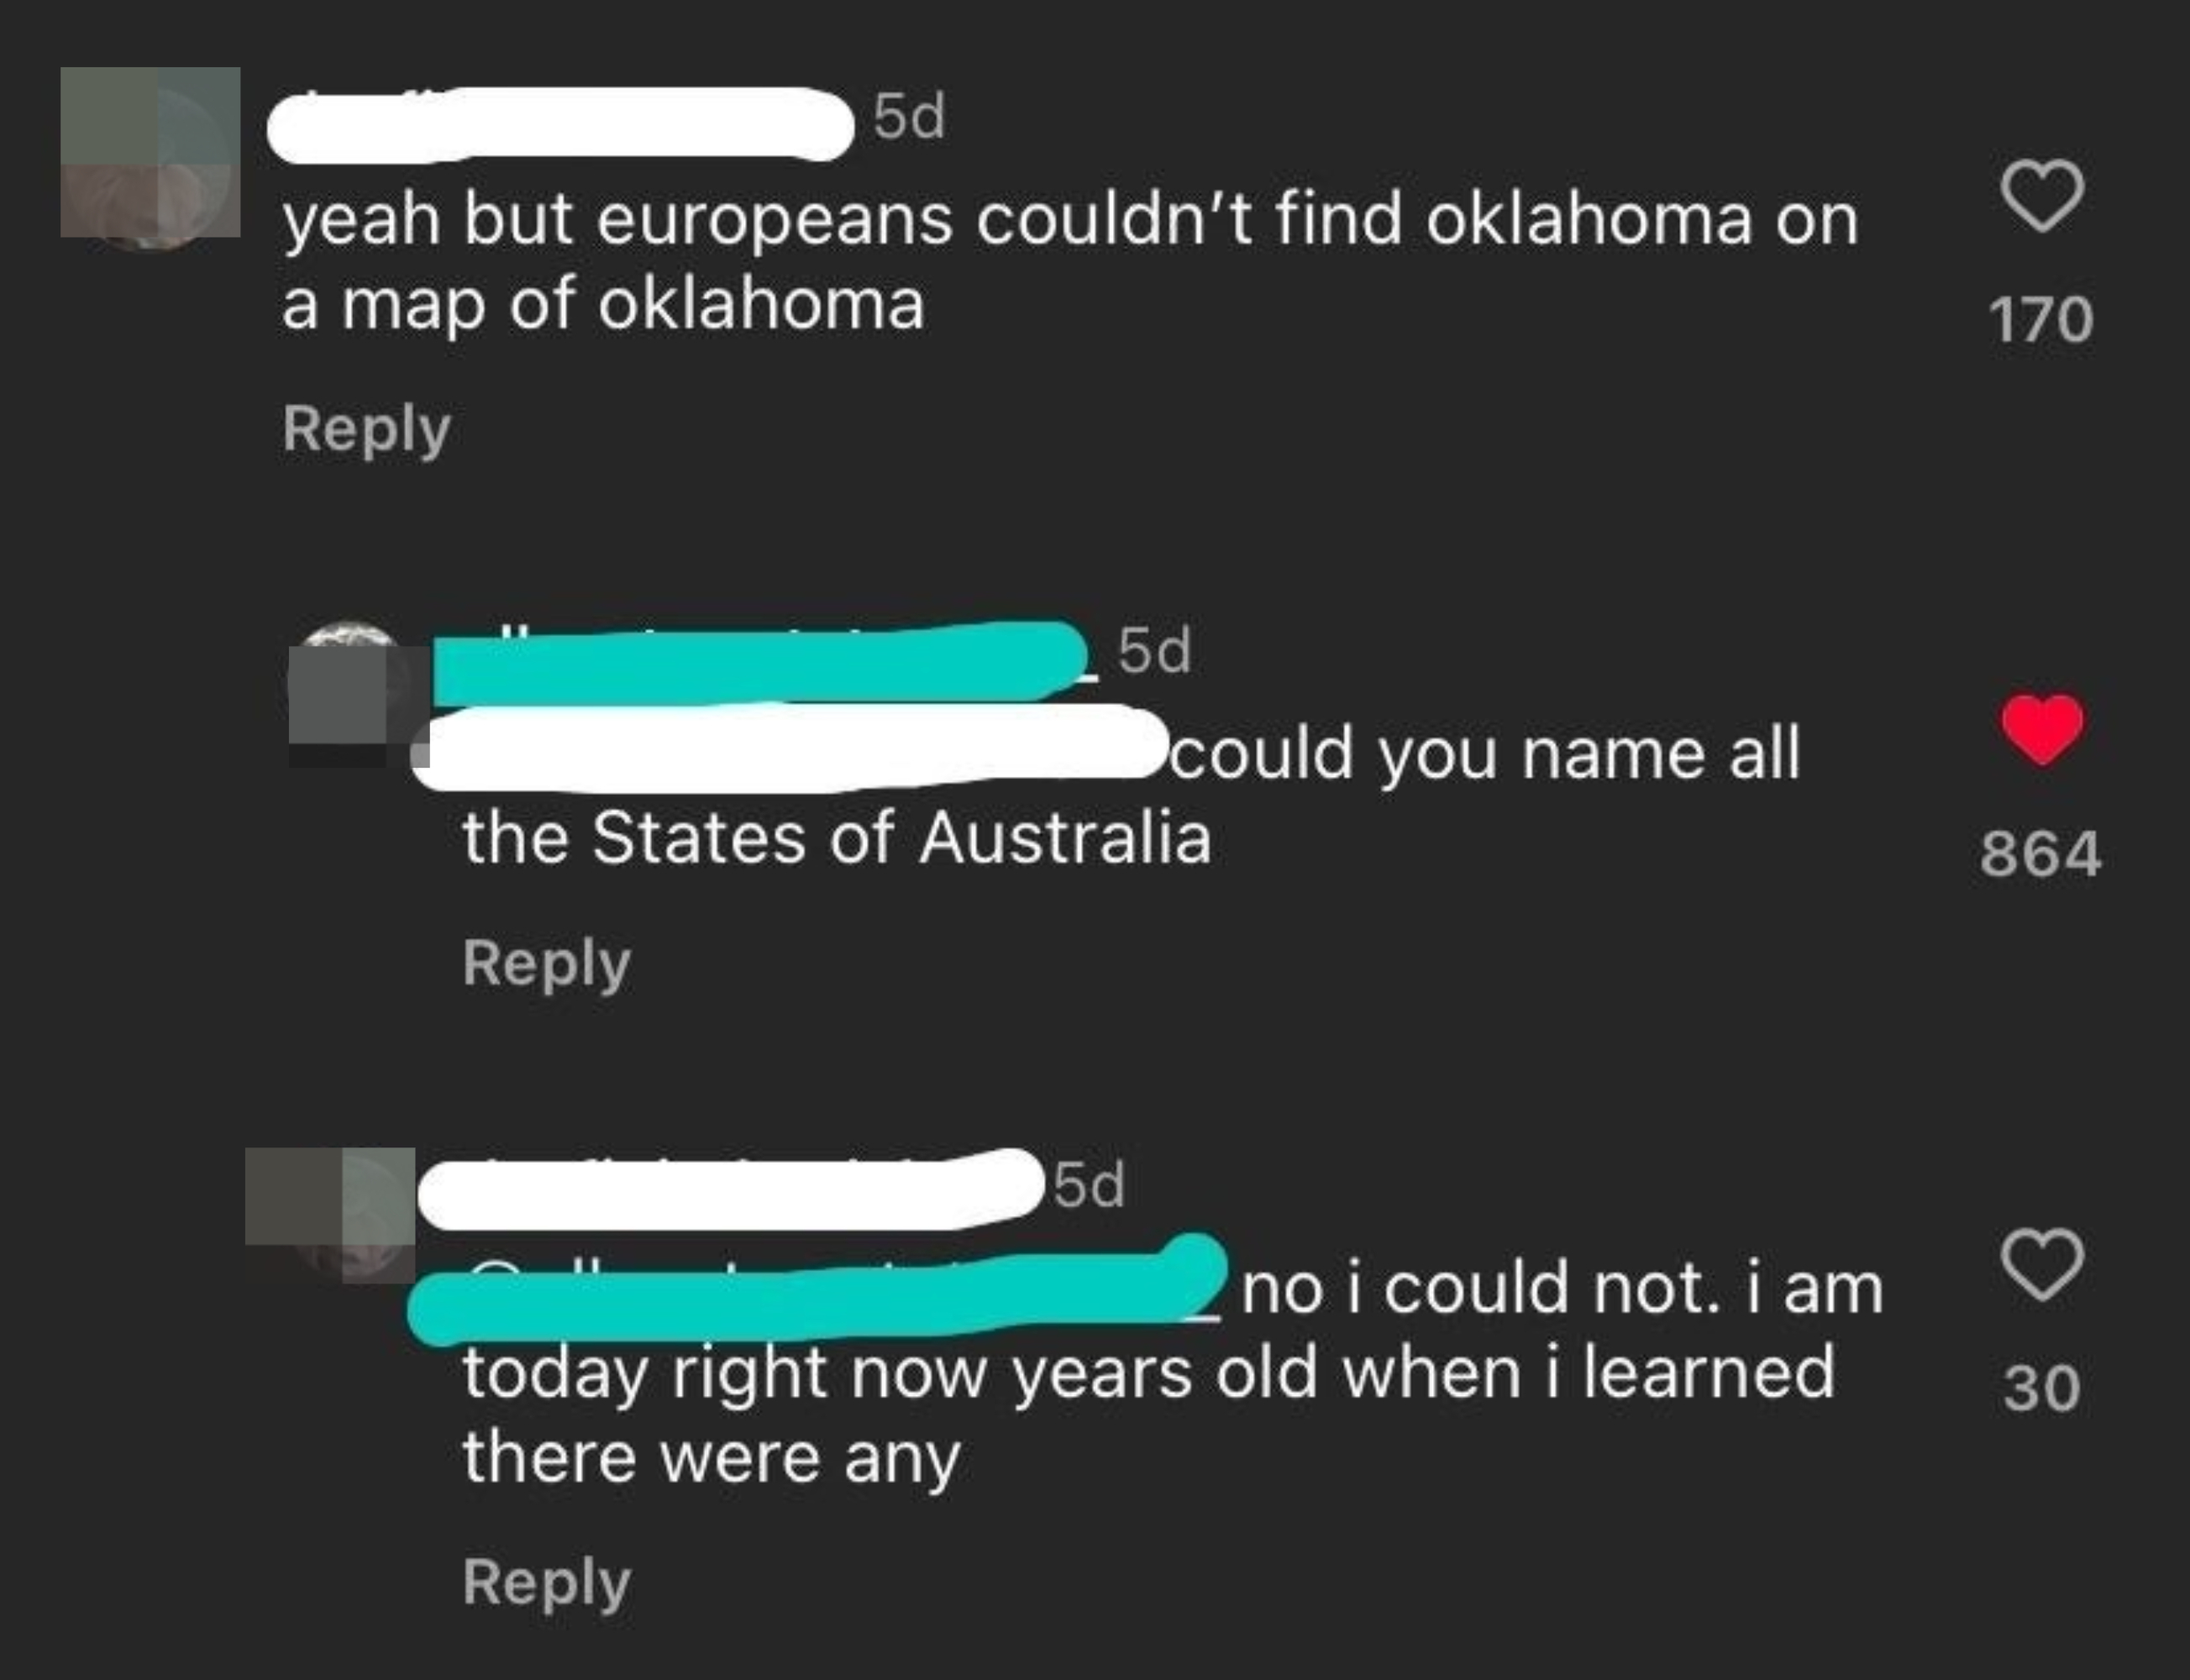 &quot;Yeah but Europeans couldn&#x27;t find Oklahoma on a map of Oklahoma,&quot; &quot;Could you name all the states of Australia?&quot; &quot;No I could not; I am today right now years old when I learned there were any&quot;